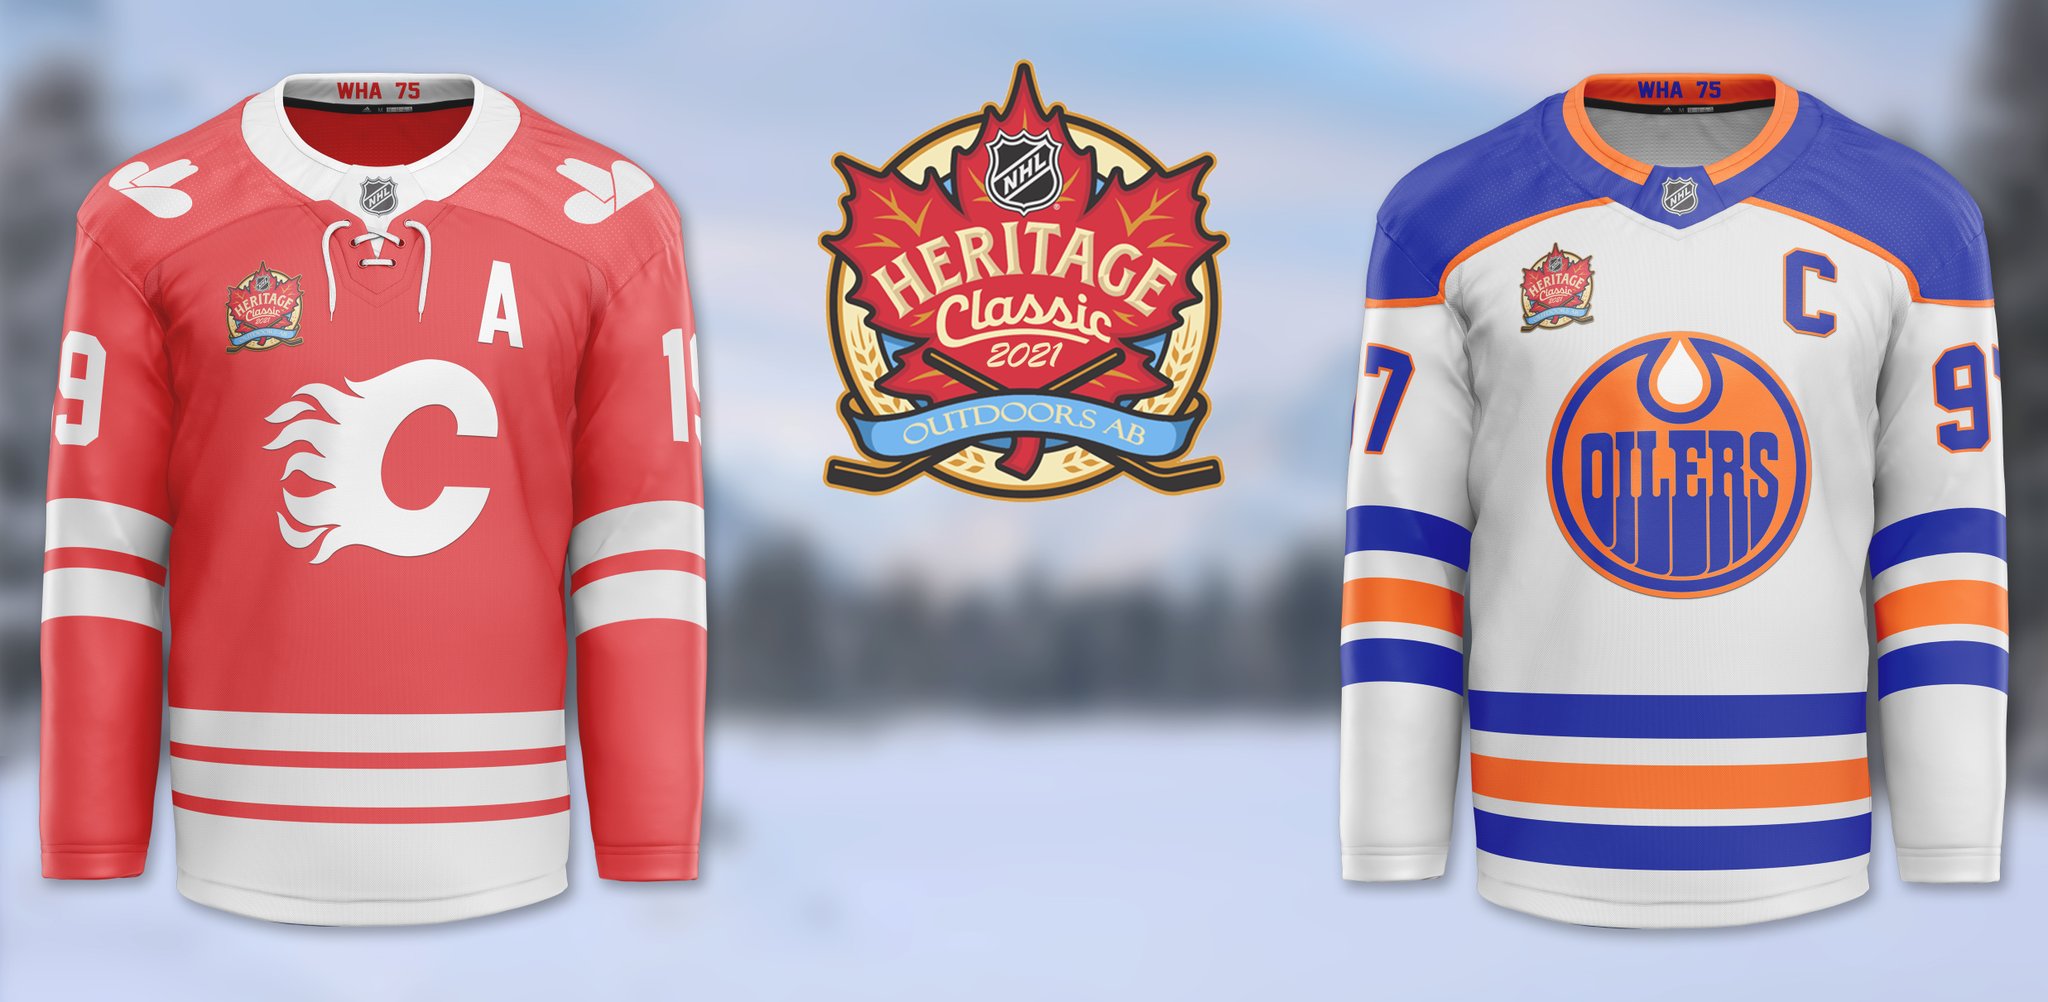 Heritage Concept Jersey throwing back to the 1908 Edmonton Hockey